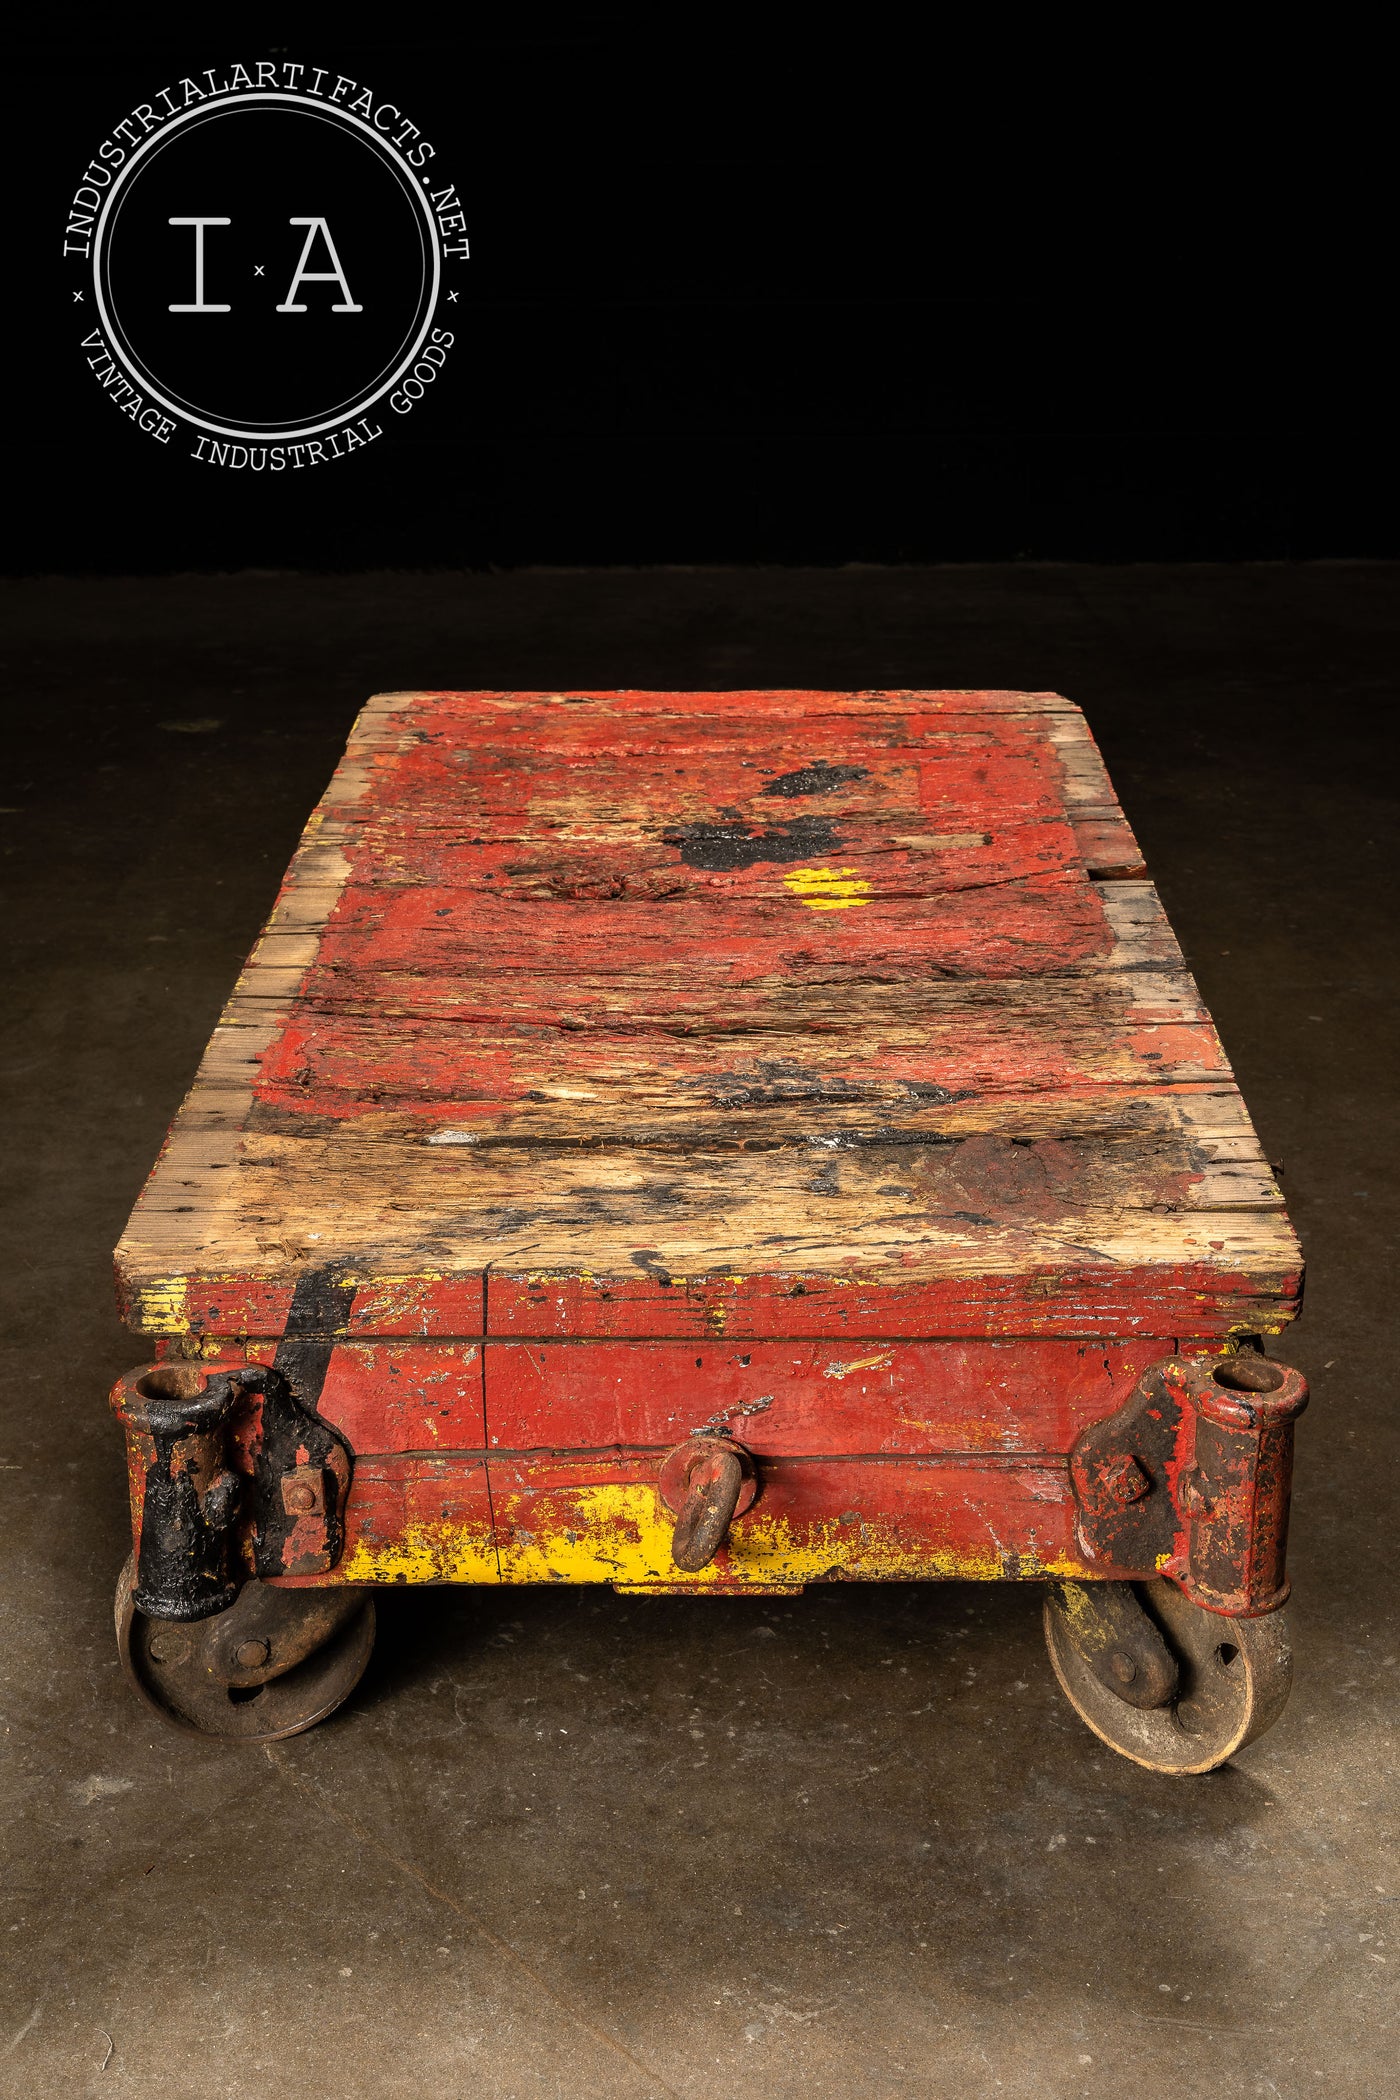 c. 1920 Industrial Wooden Cart Coffee Table